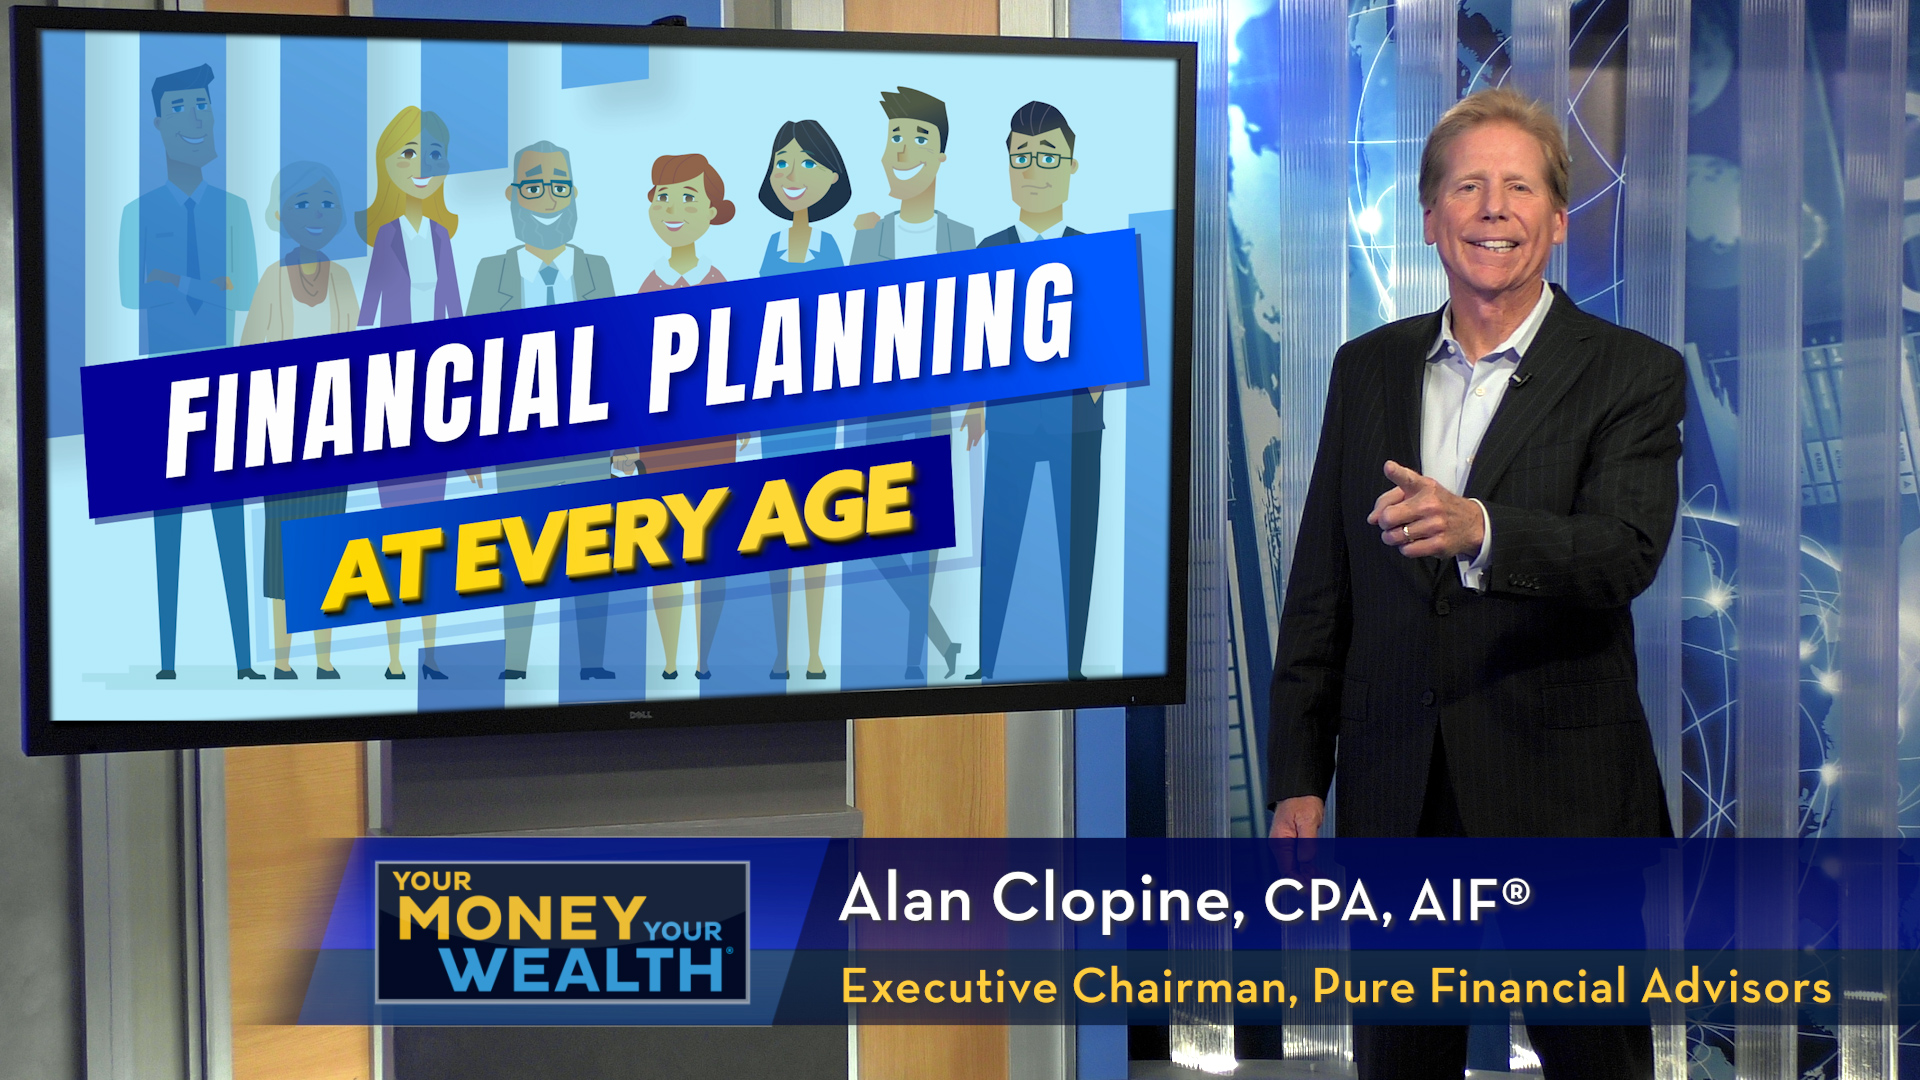 Financial Planning at Every Age: Retirement Planning for Millennials, Gen-X & Baby Boomers - Your Money, Your Wealth® TV S10 | E07